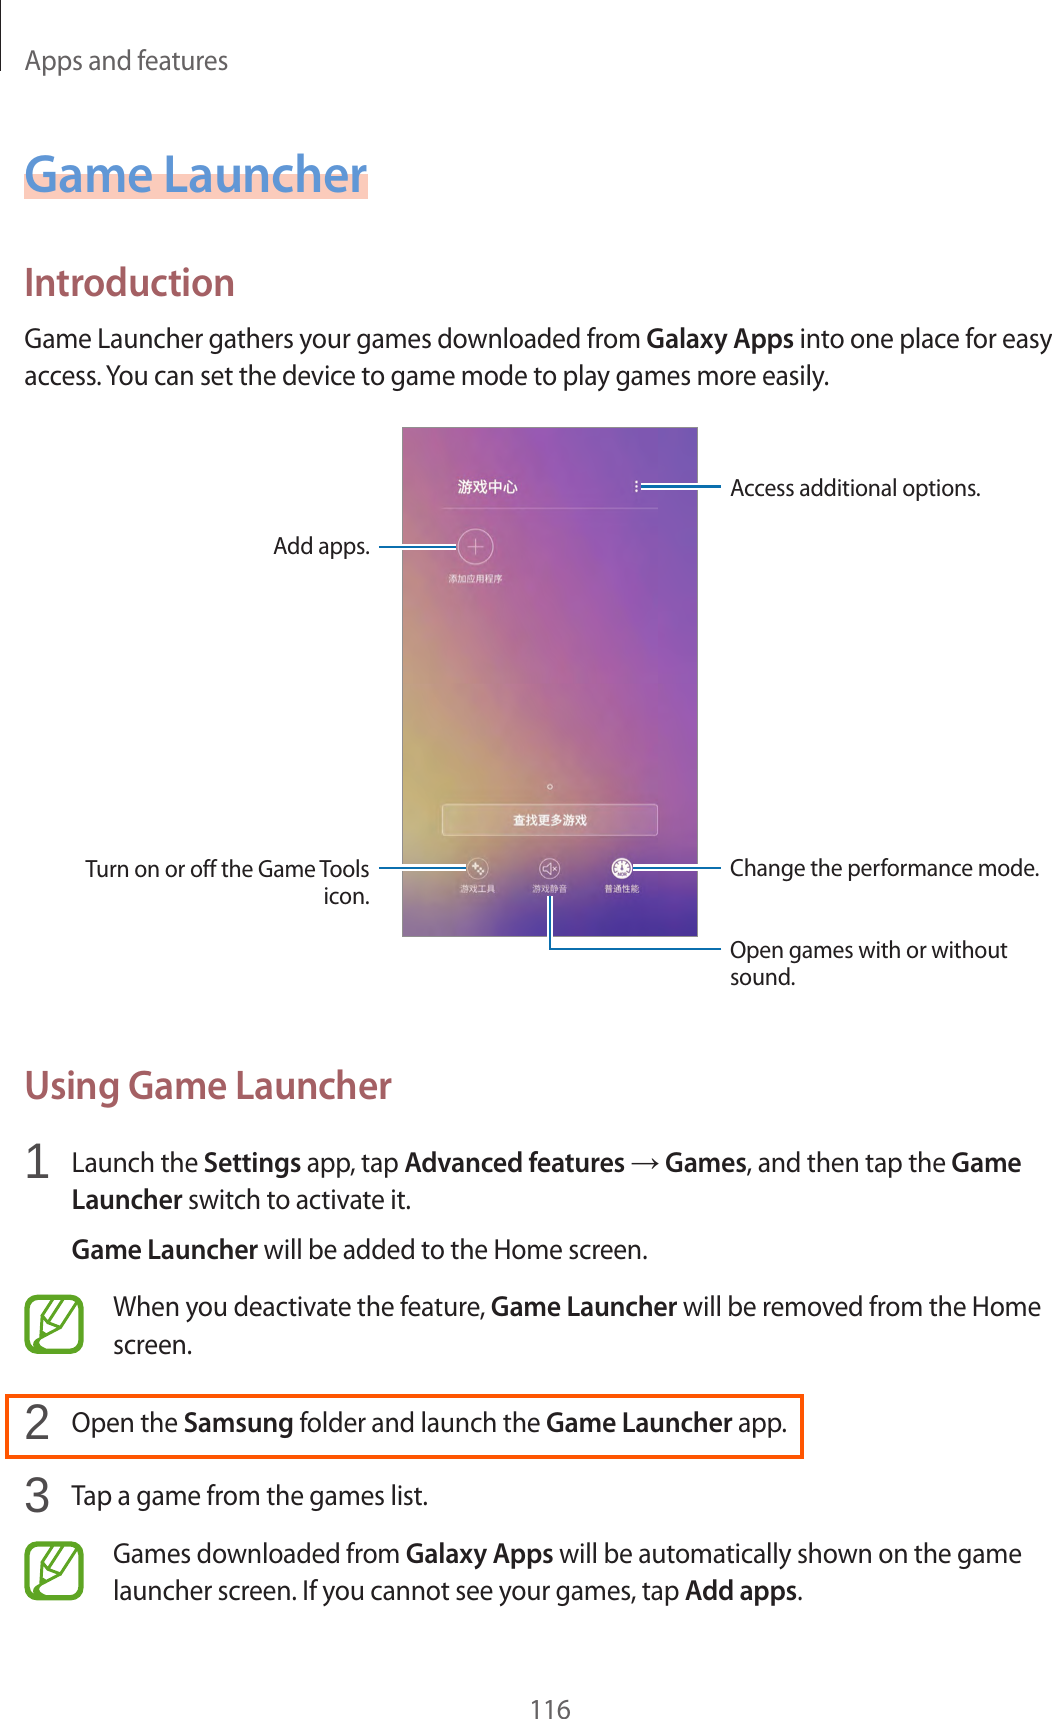 Apps and features116Game LauncherIntroductionGame Launcher gathers your games downloaded from Galaxy Apps into one place for easy access. You can set the device to game mode to play games more easily.Access additional options.Add apps.Open games with or without sound.Change the performance mode.Turn on or off the Game Tools icon.Using Game Launcher1  Launch the Settings app, tap Advanced features → Games, and then tap the Game Launcher switch to activate it.Game Launcher will be added to the Home screen.When you deactivate the feature, Game Launcher will be removed from the Home screen.2  Open the Samsung folder and launch the Game Launcher app.3  Tap a game from the games list.Games downloaded from Galaxy Apps will be automatically shown on the game launcher screen. If you cannot see your games, tap Add apps.